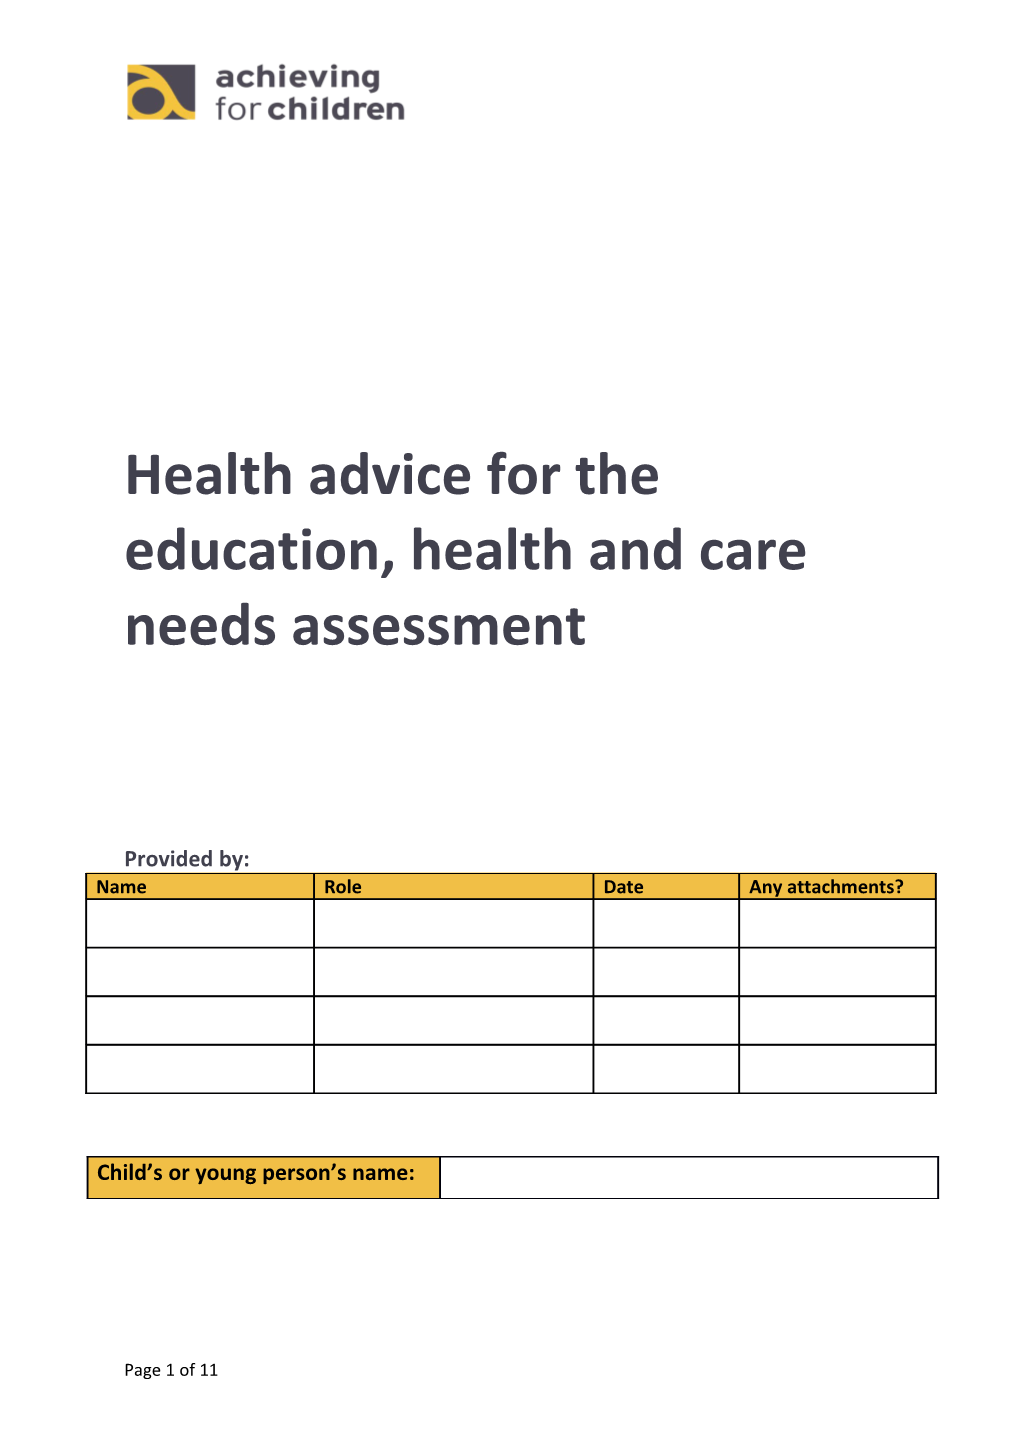 Health Advice for the Education, Health and Care Plan